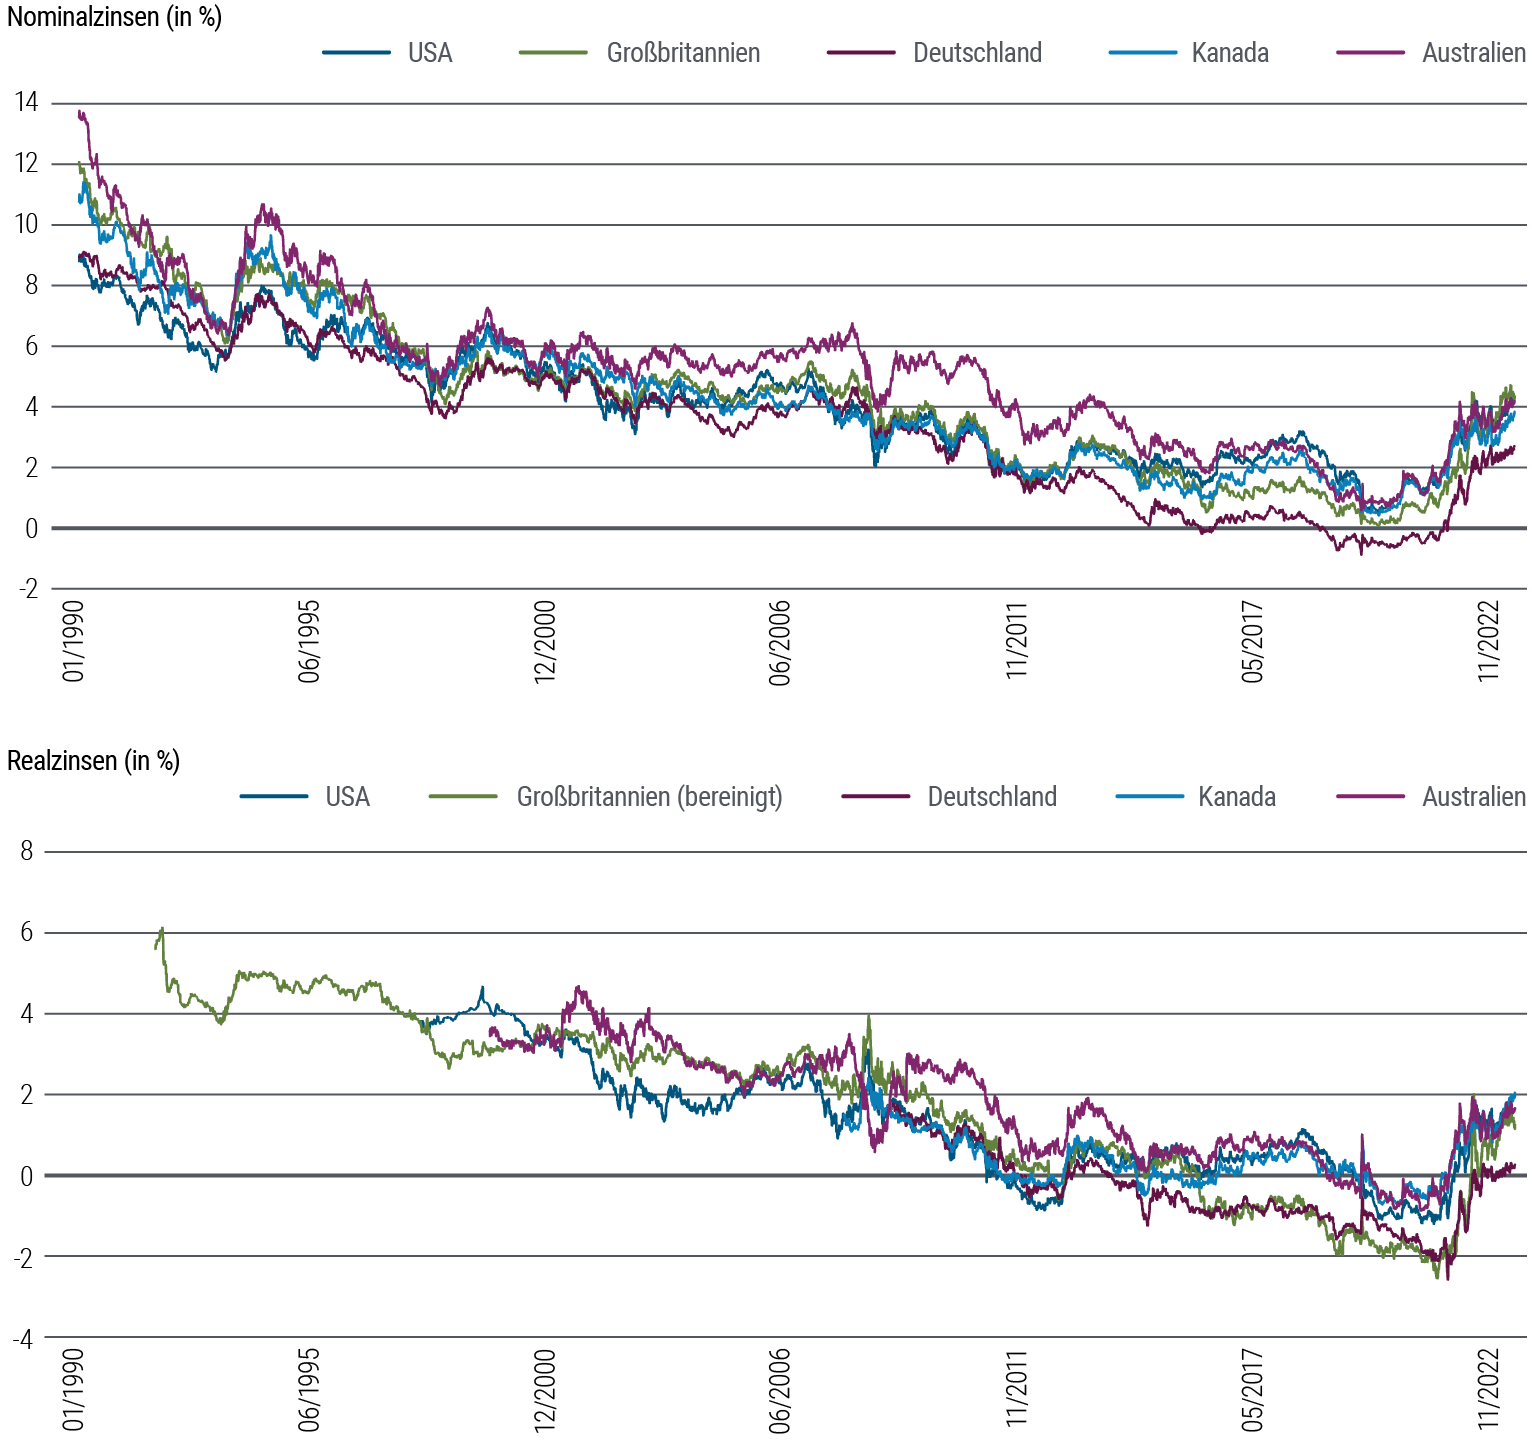 Figure 4 is two line charts. The first chart shows 10-year nominal interest rates in 5 developed market countries (U.S., U.K., Germany, Canada, and Australia) from 1990 through September 2023. In that time frame, nominal yields fluctuated some but along a downward trend from about 9%–14% in 1990 to a low hovering around zero in 2020, around the pandemic. They have since risen into a range from above 2% to above 4%. The second chart shows 10-year real rates for the same countries over the same time frame. Real rates generally and gradually dropped for much of that period, then rose rapidly following the pandemic, slowing those gains more recently but still off their lows and in a range of 0.5%–2.5%. Data source is PIMCO and Bloomberg as of 2 October 2023.